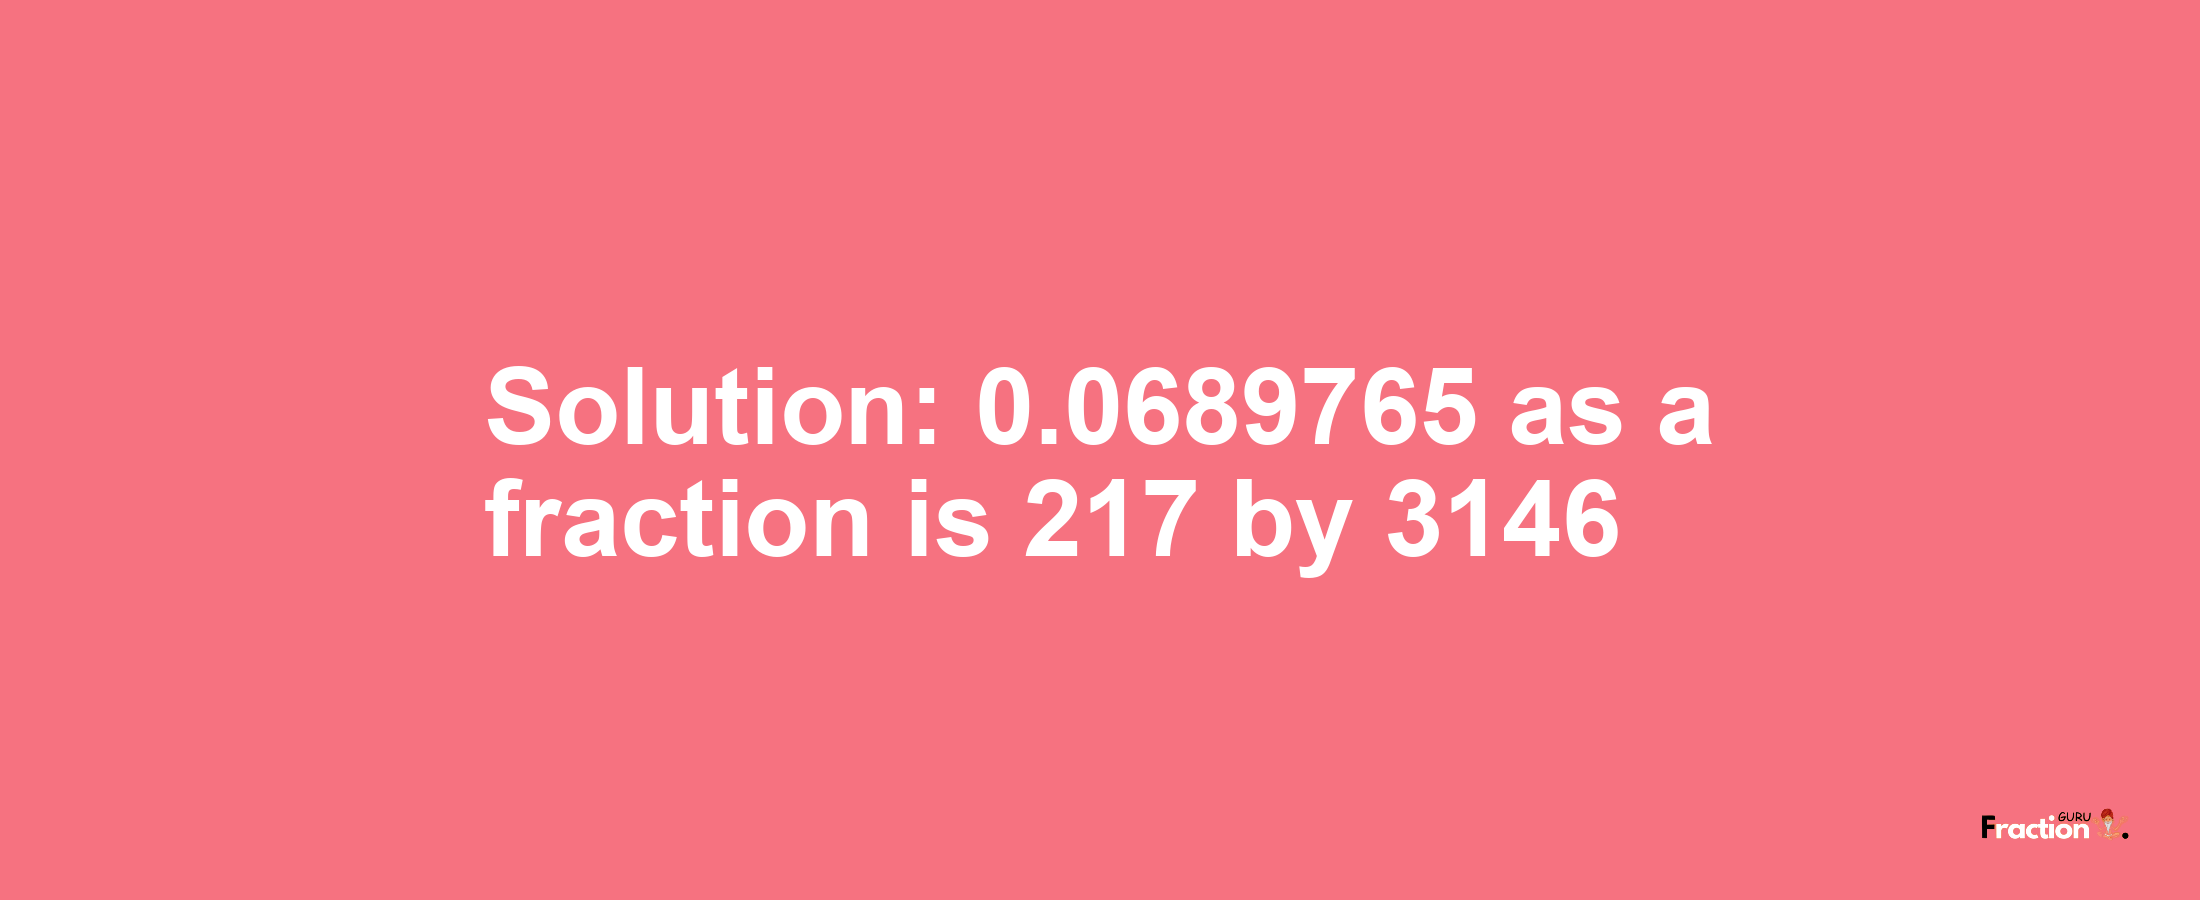 Solution:0.0689765 as a fraction is 217/3146